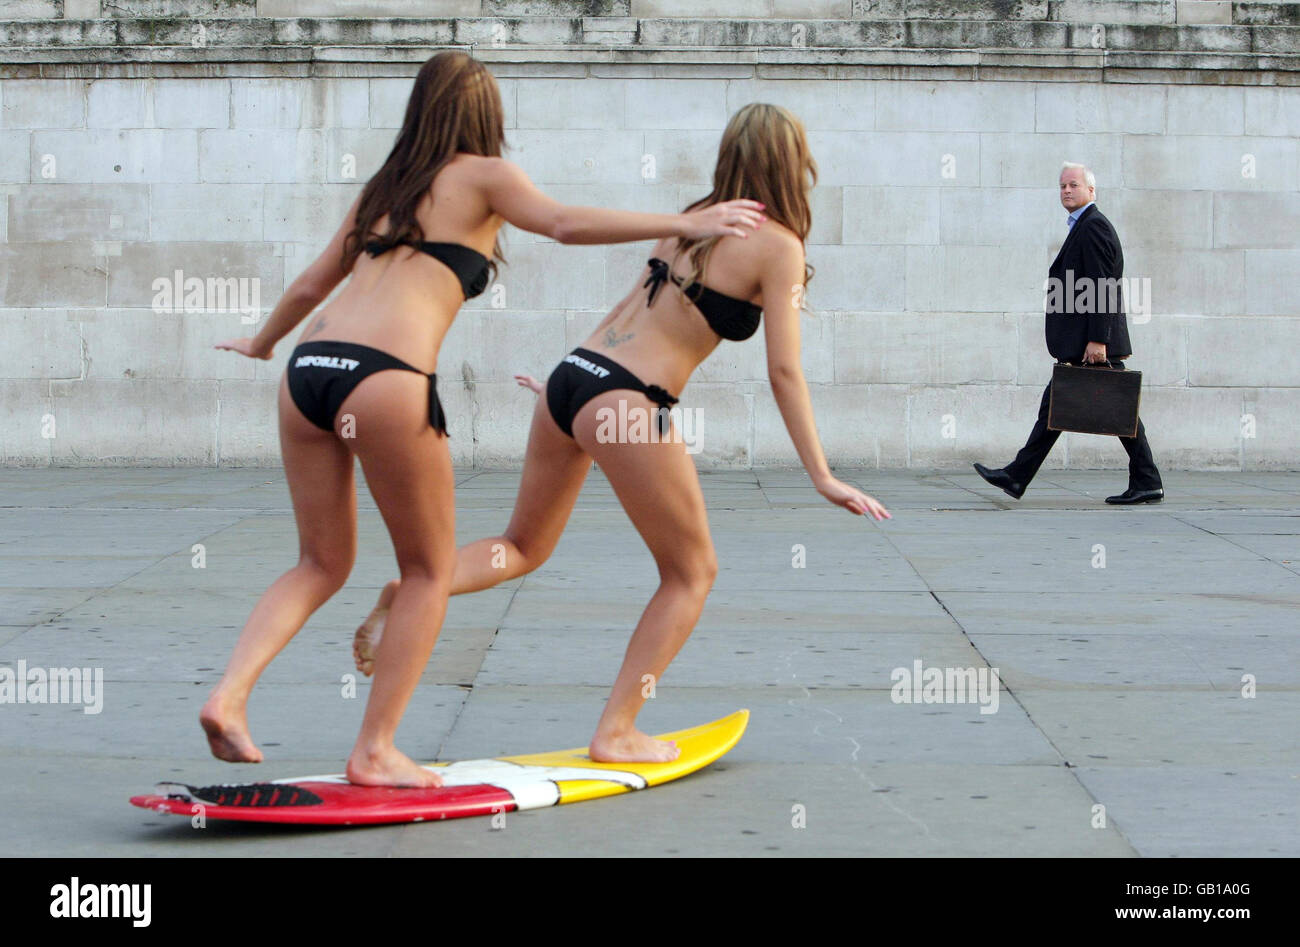 Models Kristina Andriotis (left) and Natasha Andriotis attract the attention of a passer by at the launch of internet extreme sports channel MPORA.TV, at Trafalgar Square, London. Stock Photo